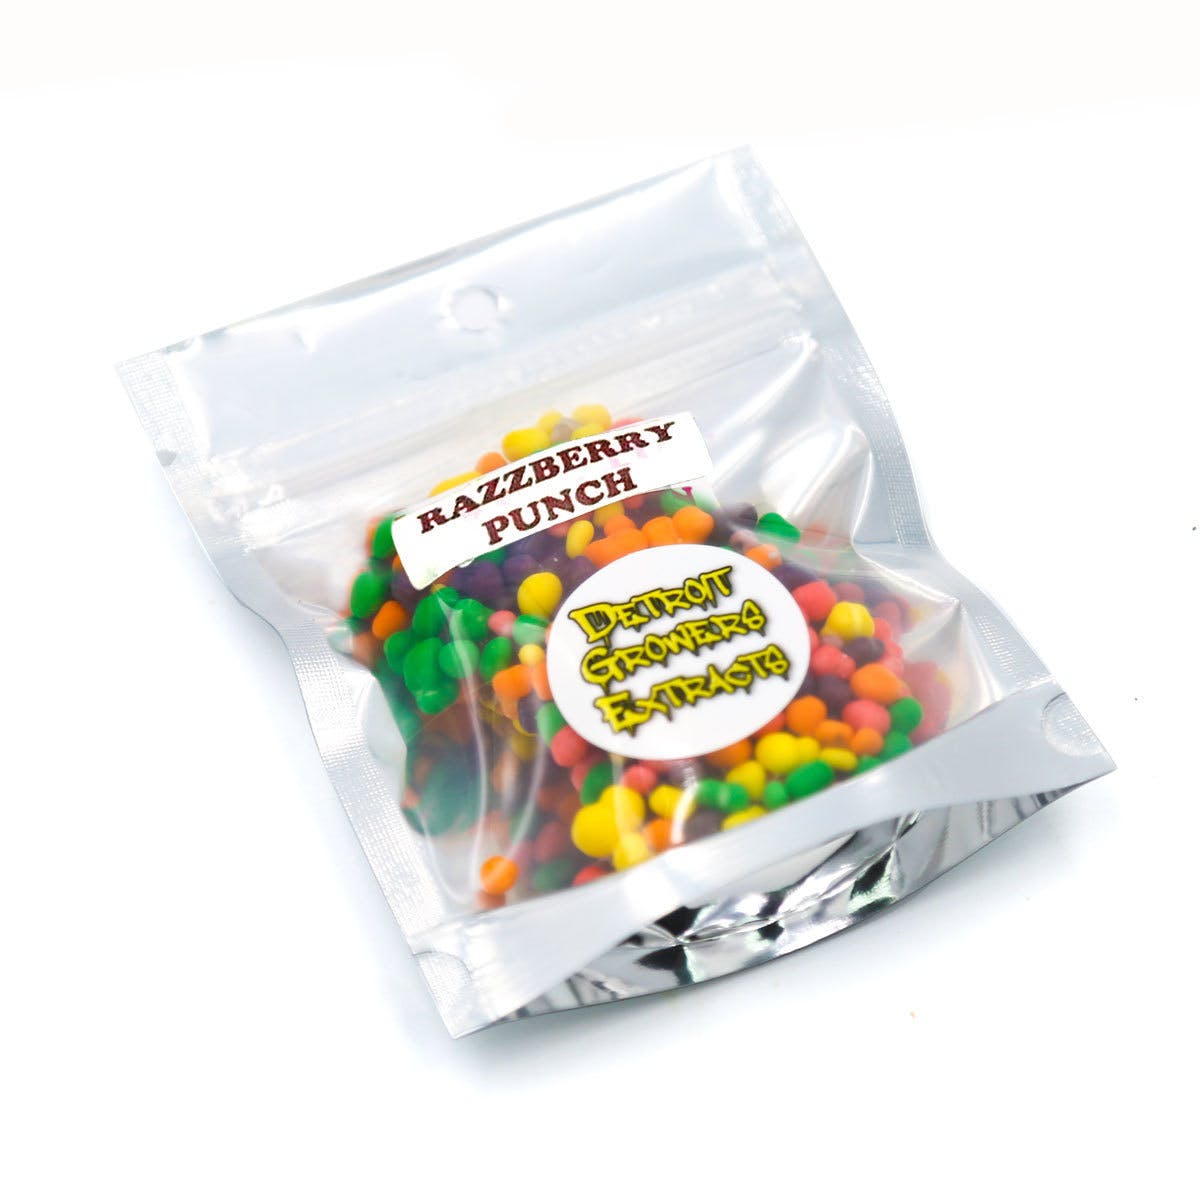 edible-detroit-growers-extracts-razzberry-punch-nerds-rope-100mg